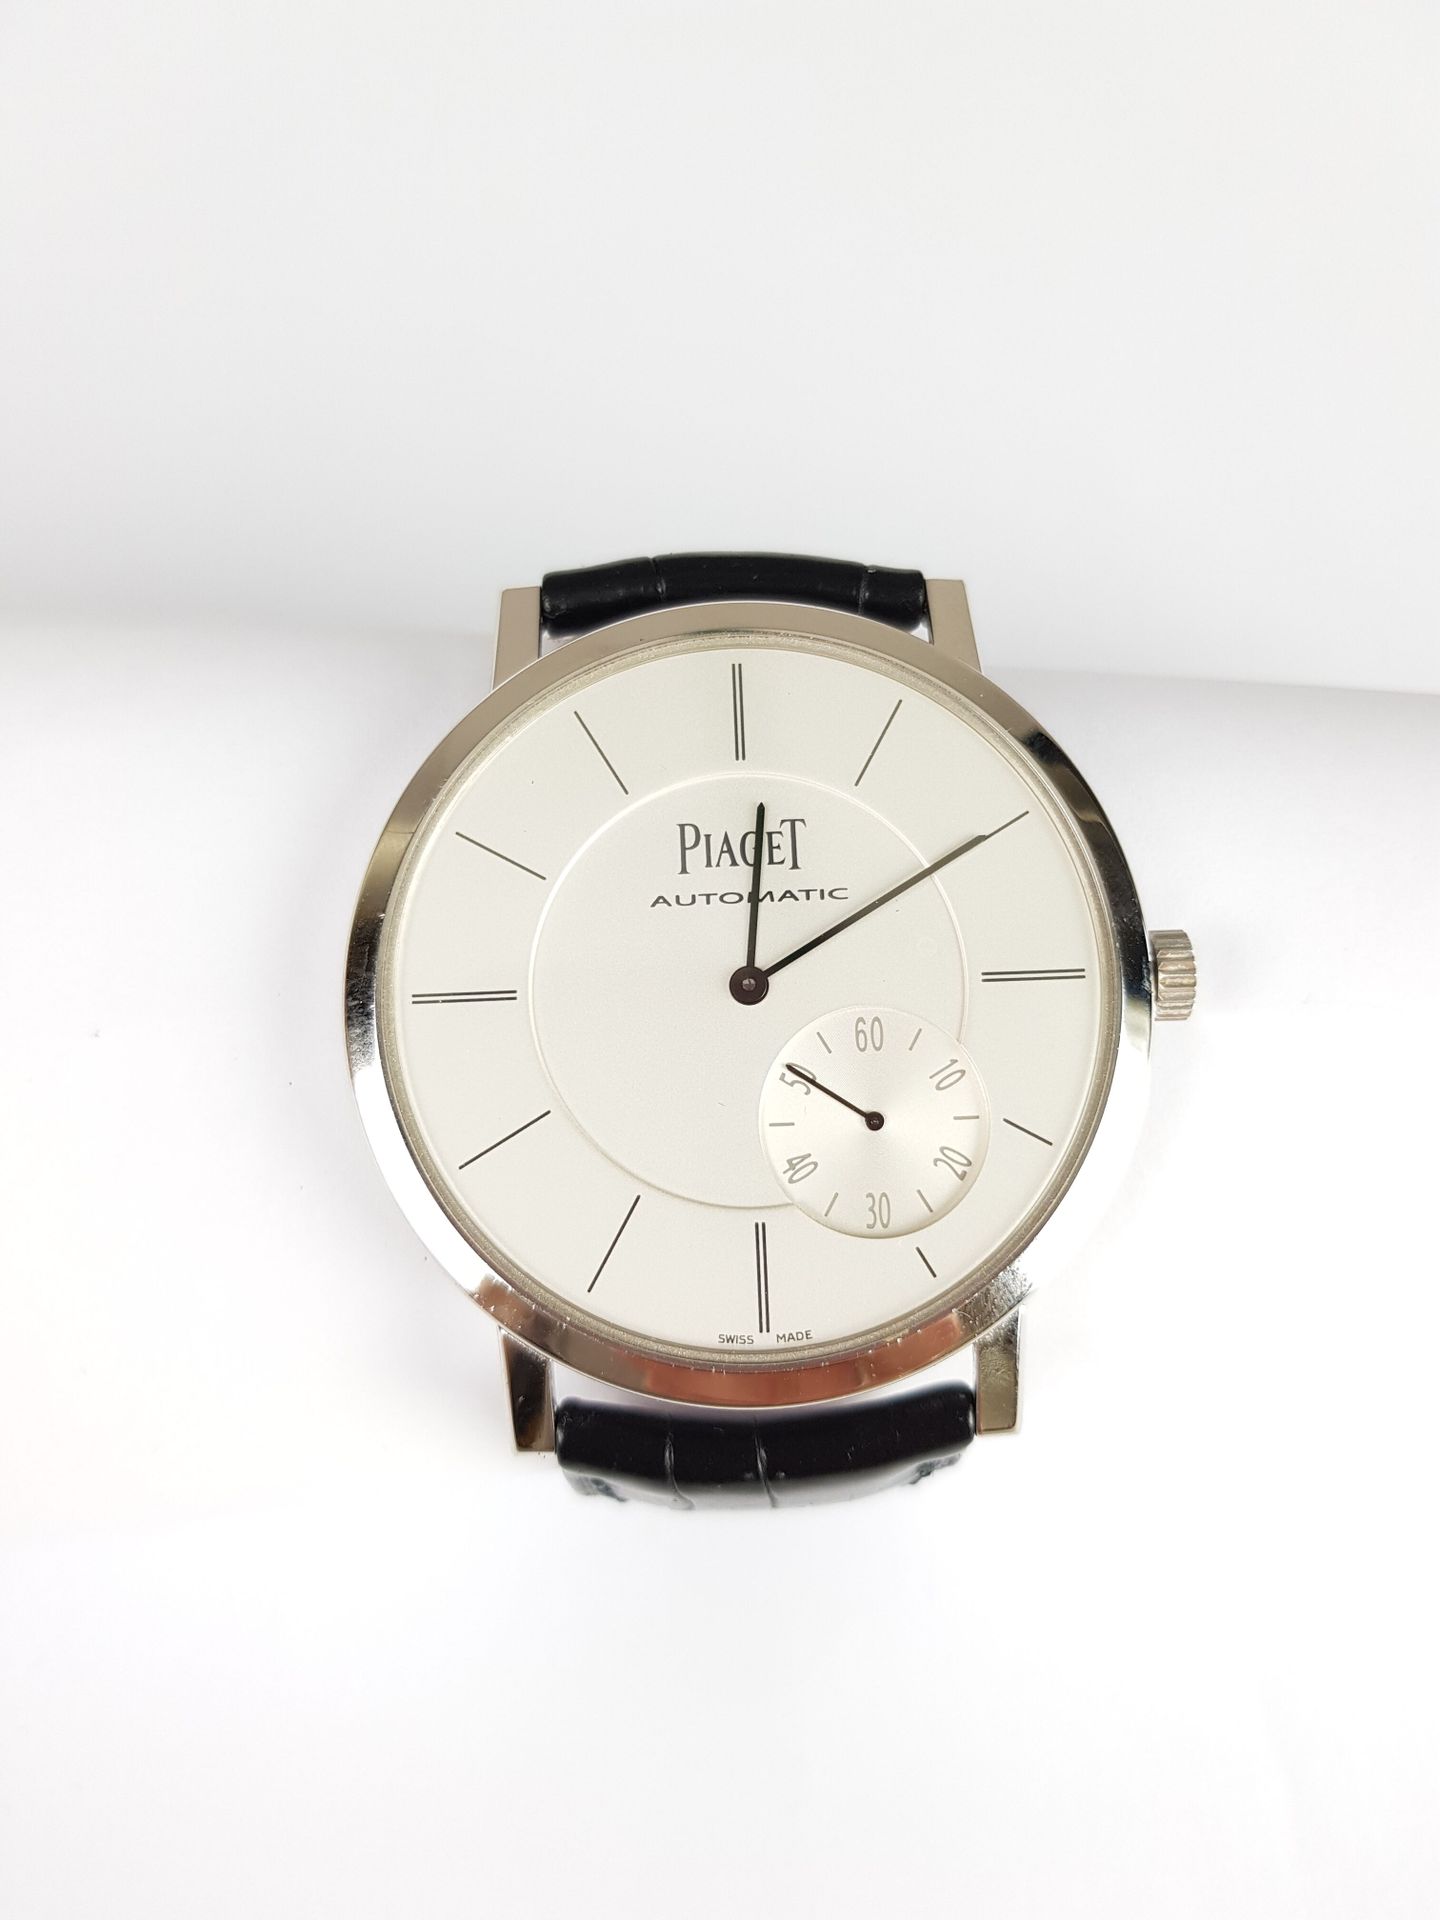 Null Starting price : 1 500 €.

PIAGET

Watch in white gold 750 thousandth, roun&hellip;